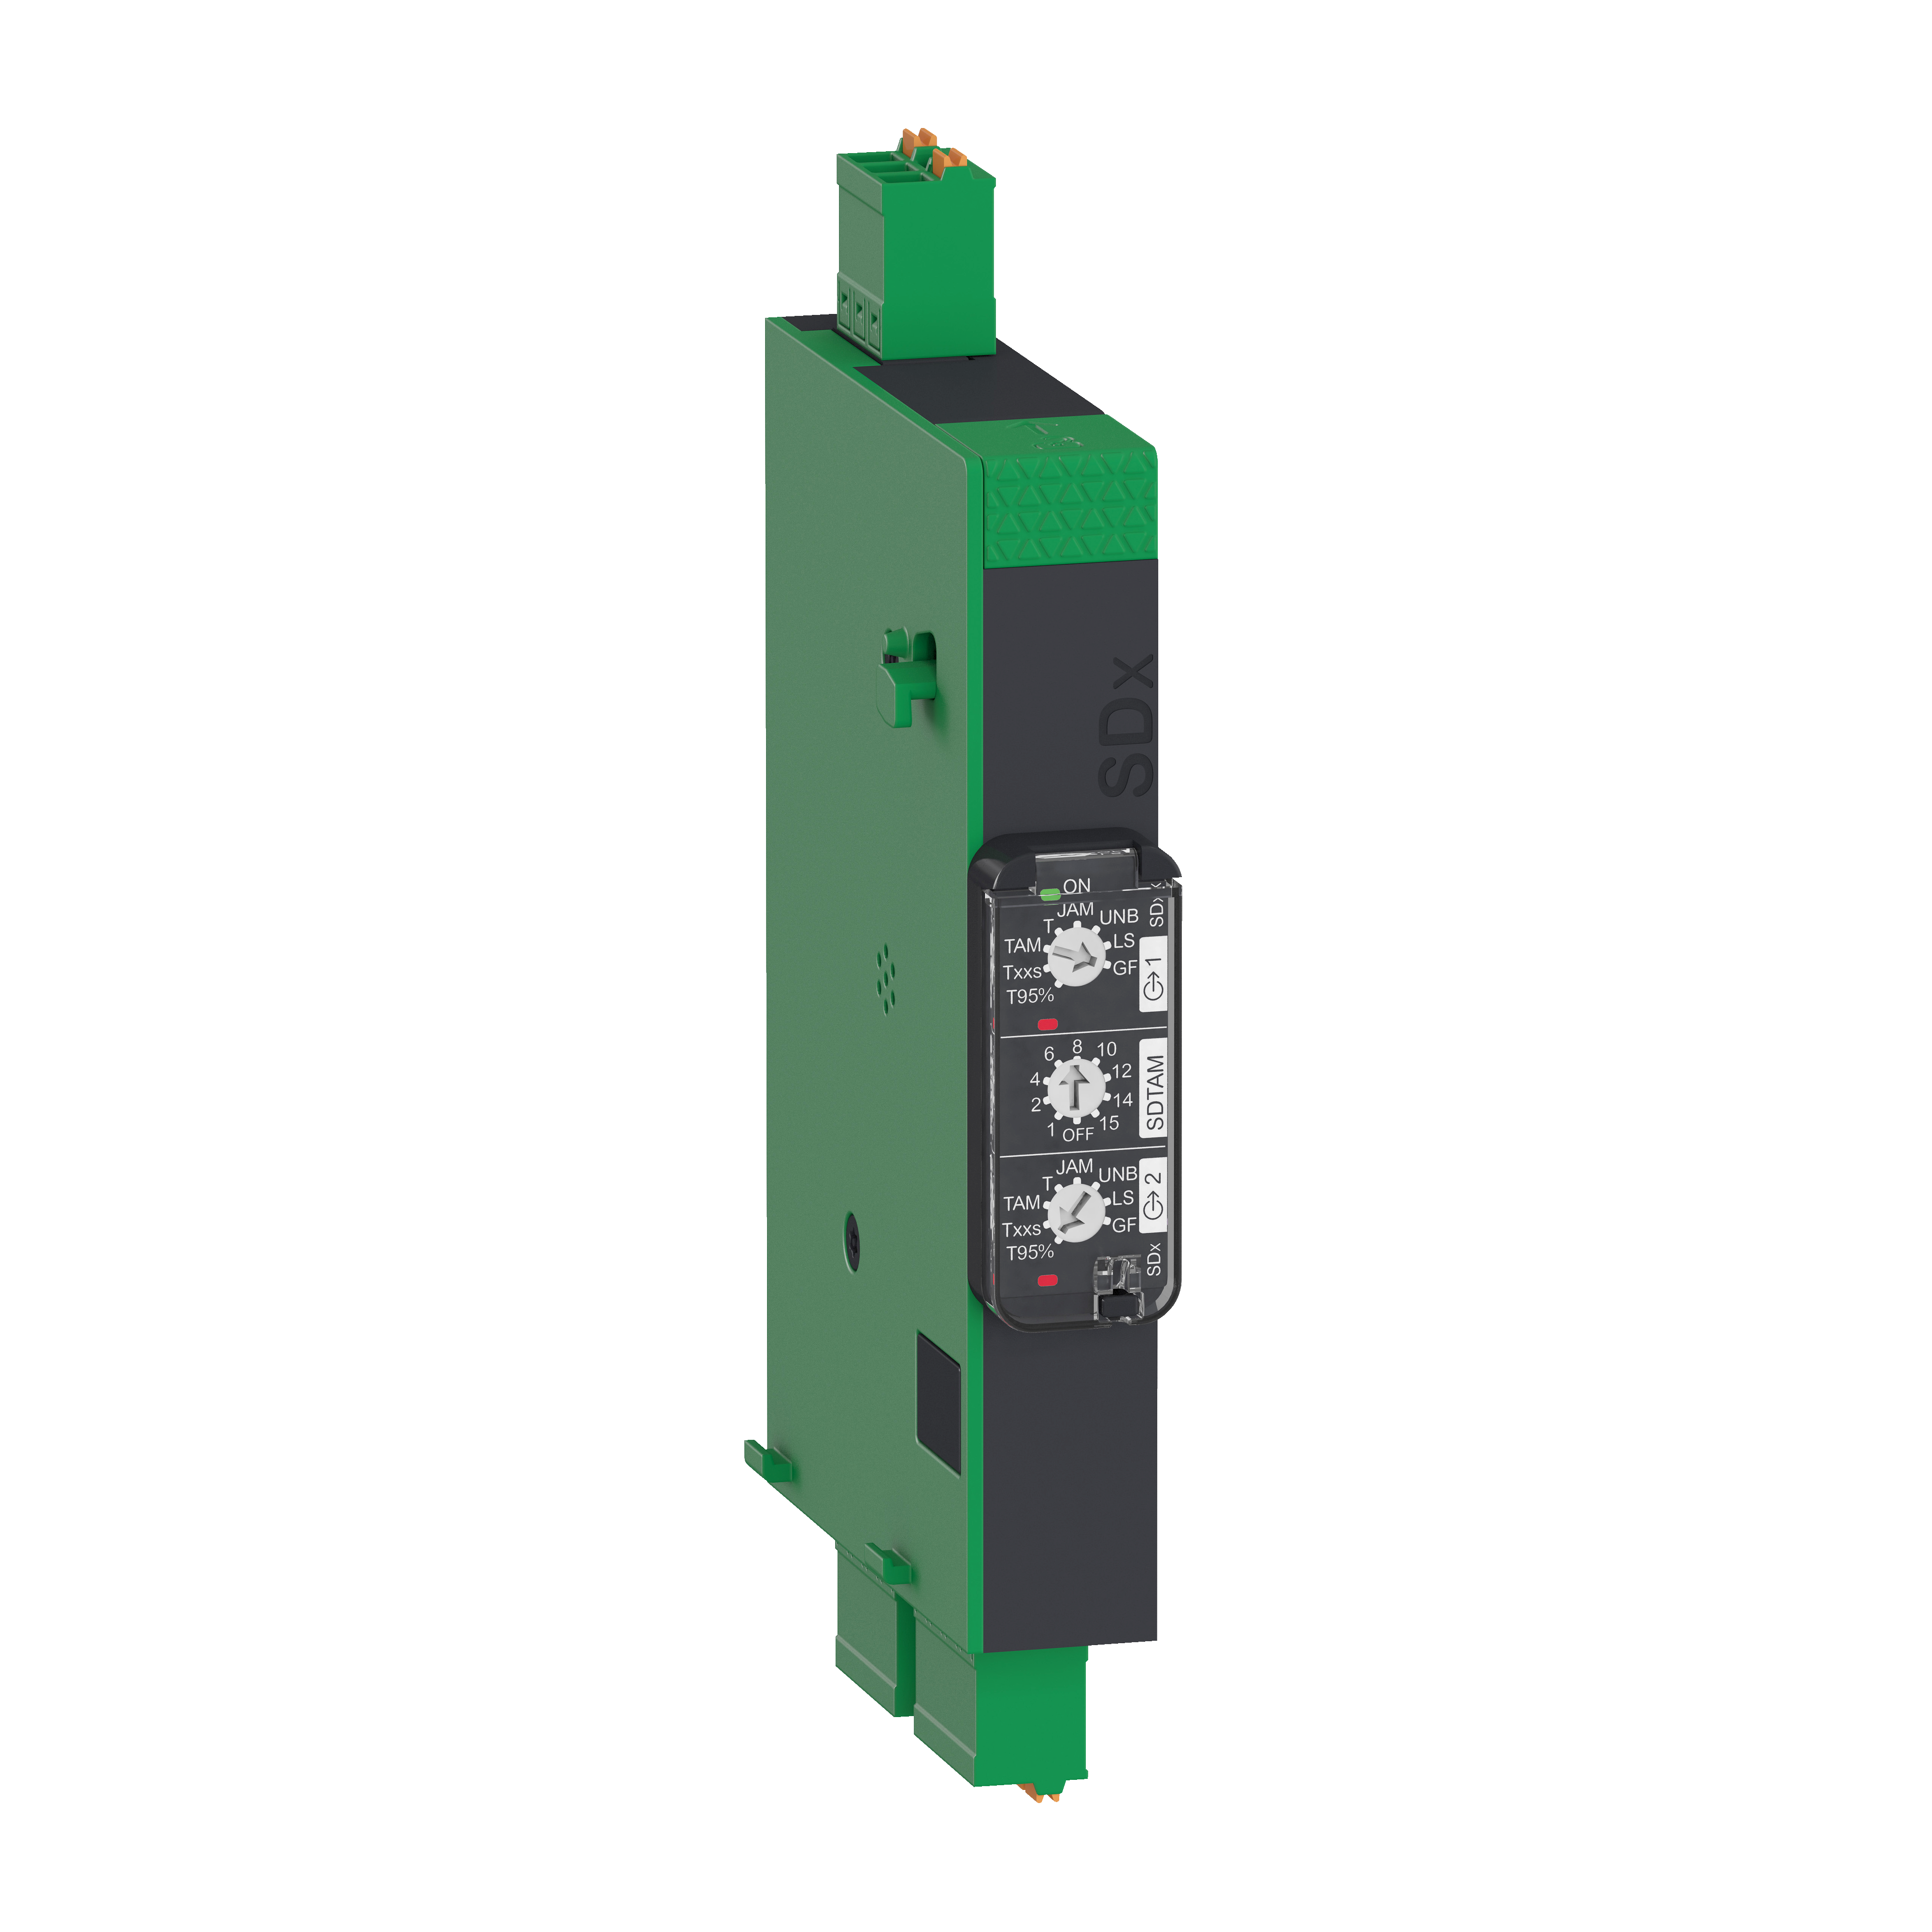 Motor circuit breaker, TeSys Deca, 2 normally open and 2 normally closed contacts, SDx contact module, GV4PEM